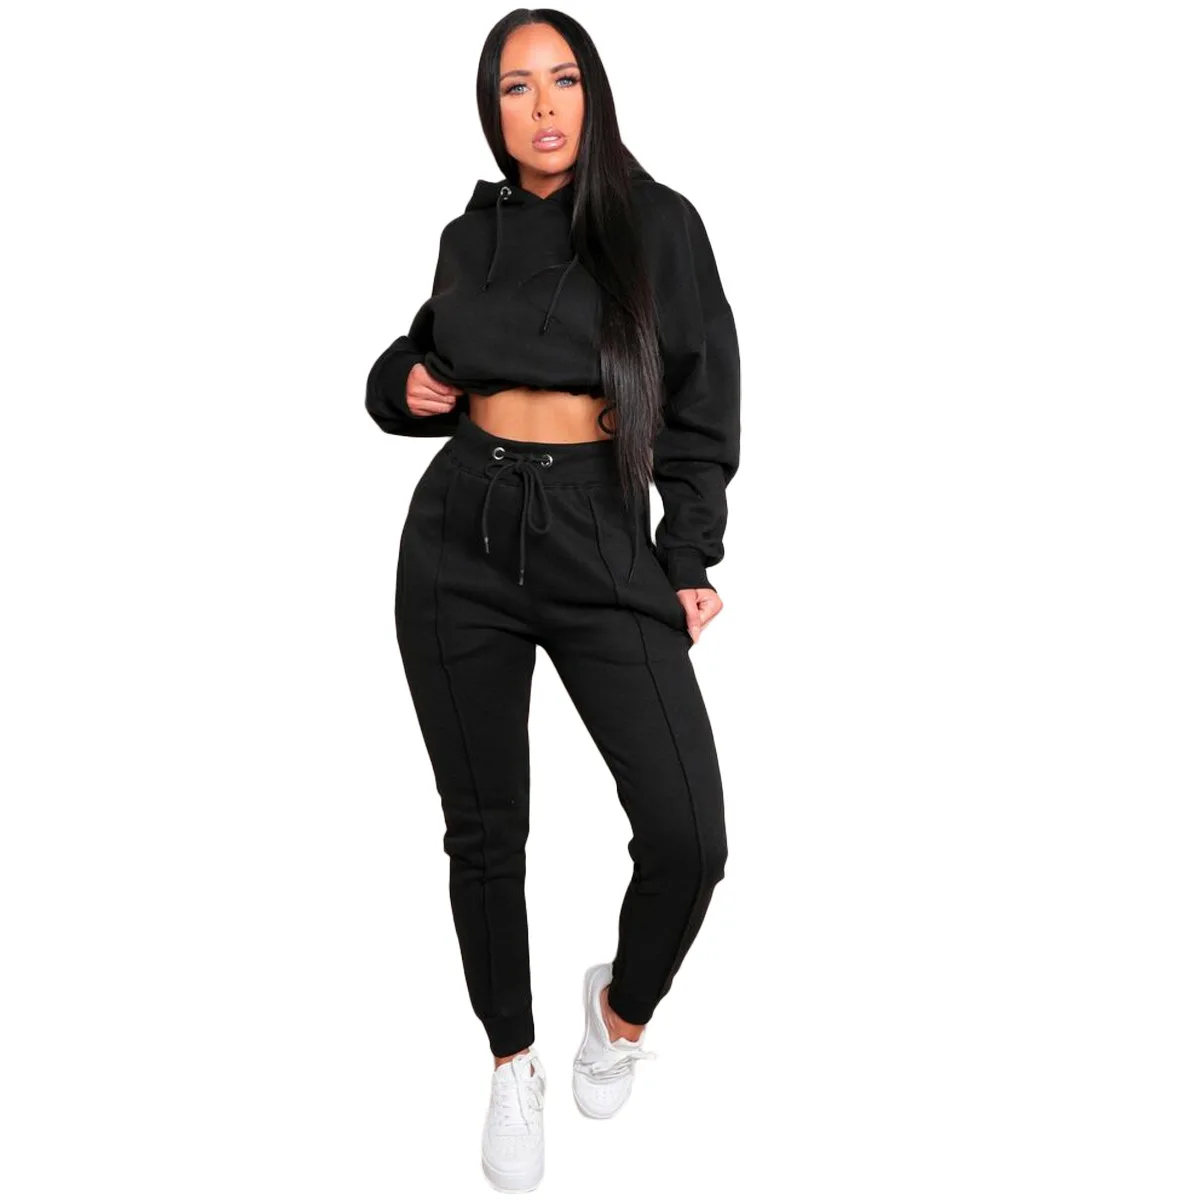 Solid color cropped hooded sweater elastic waist trousers sports two piece pants set